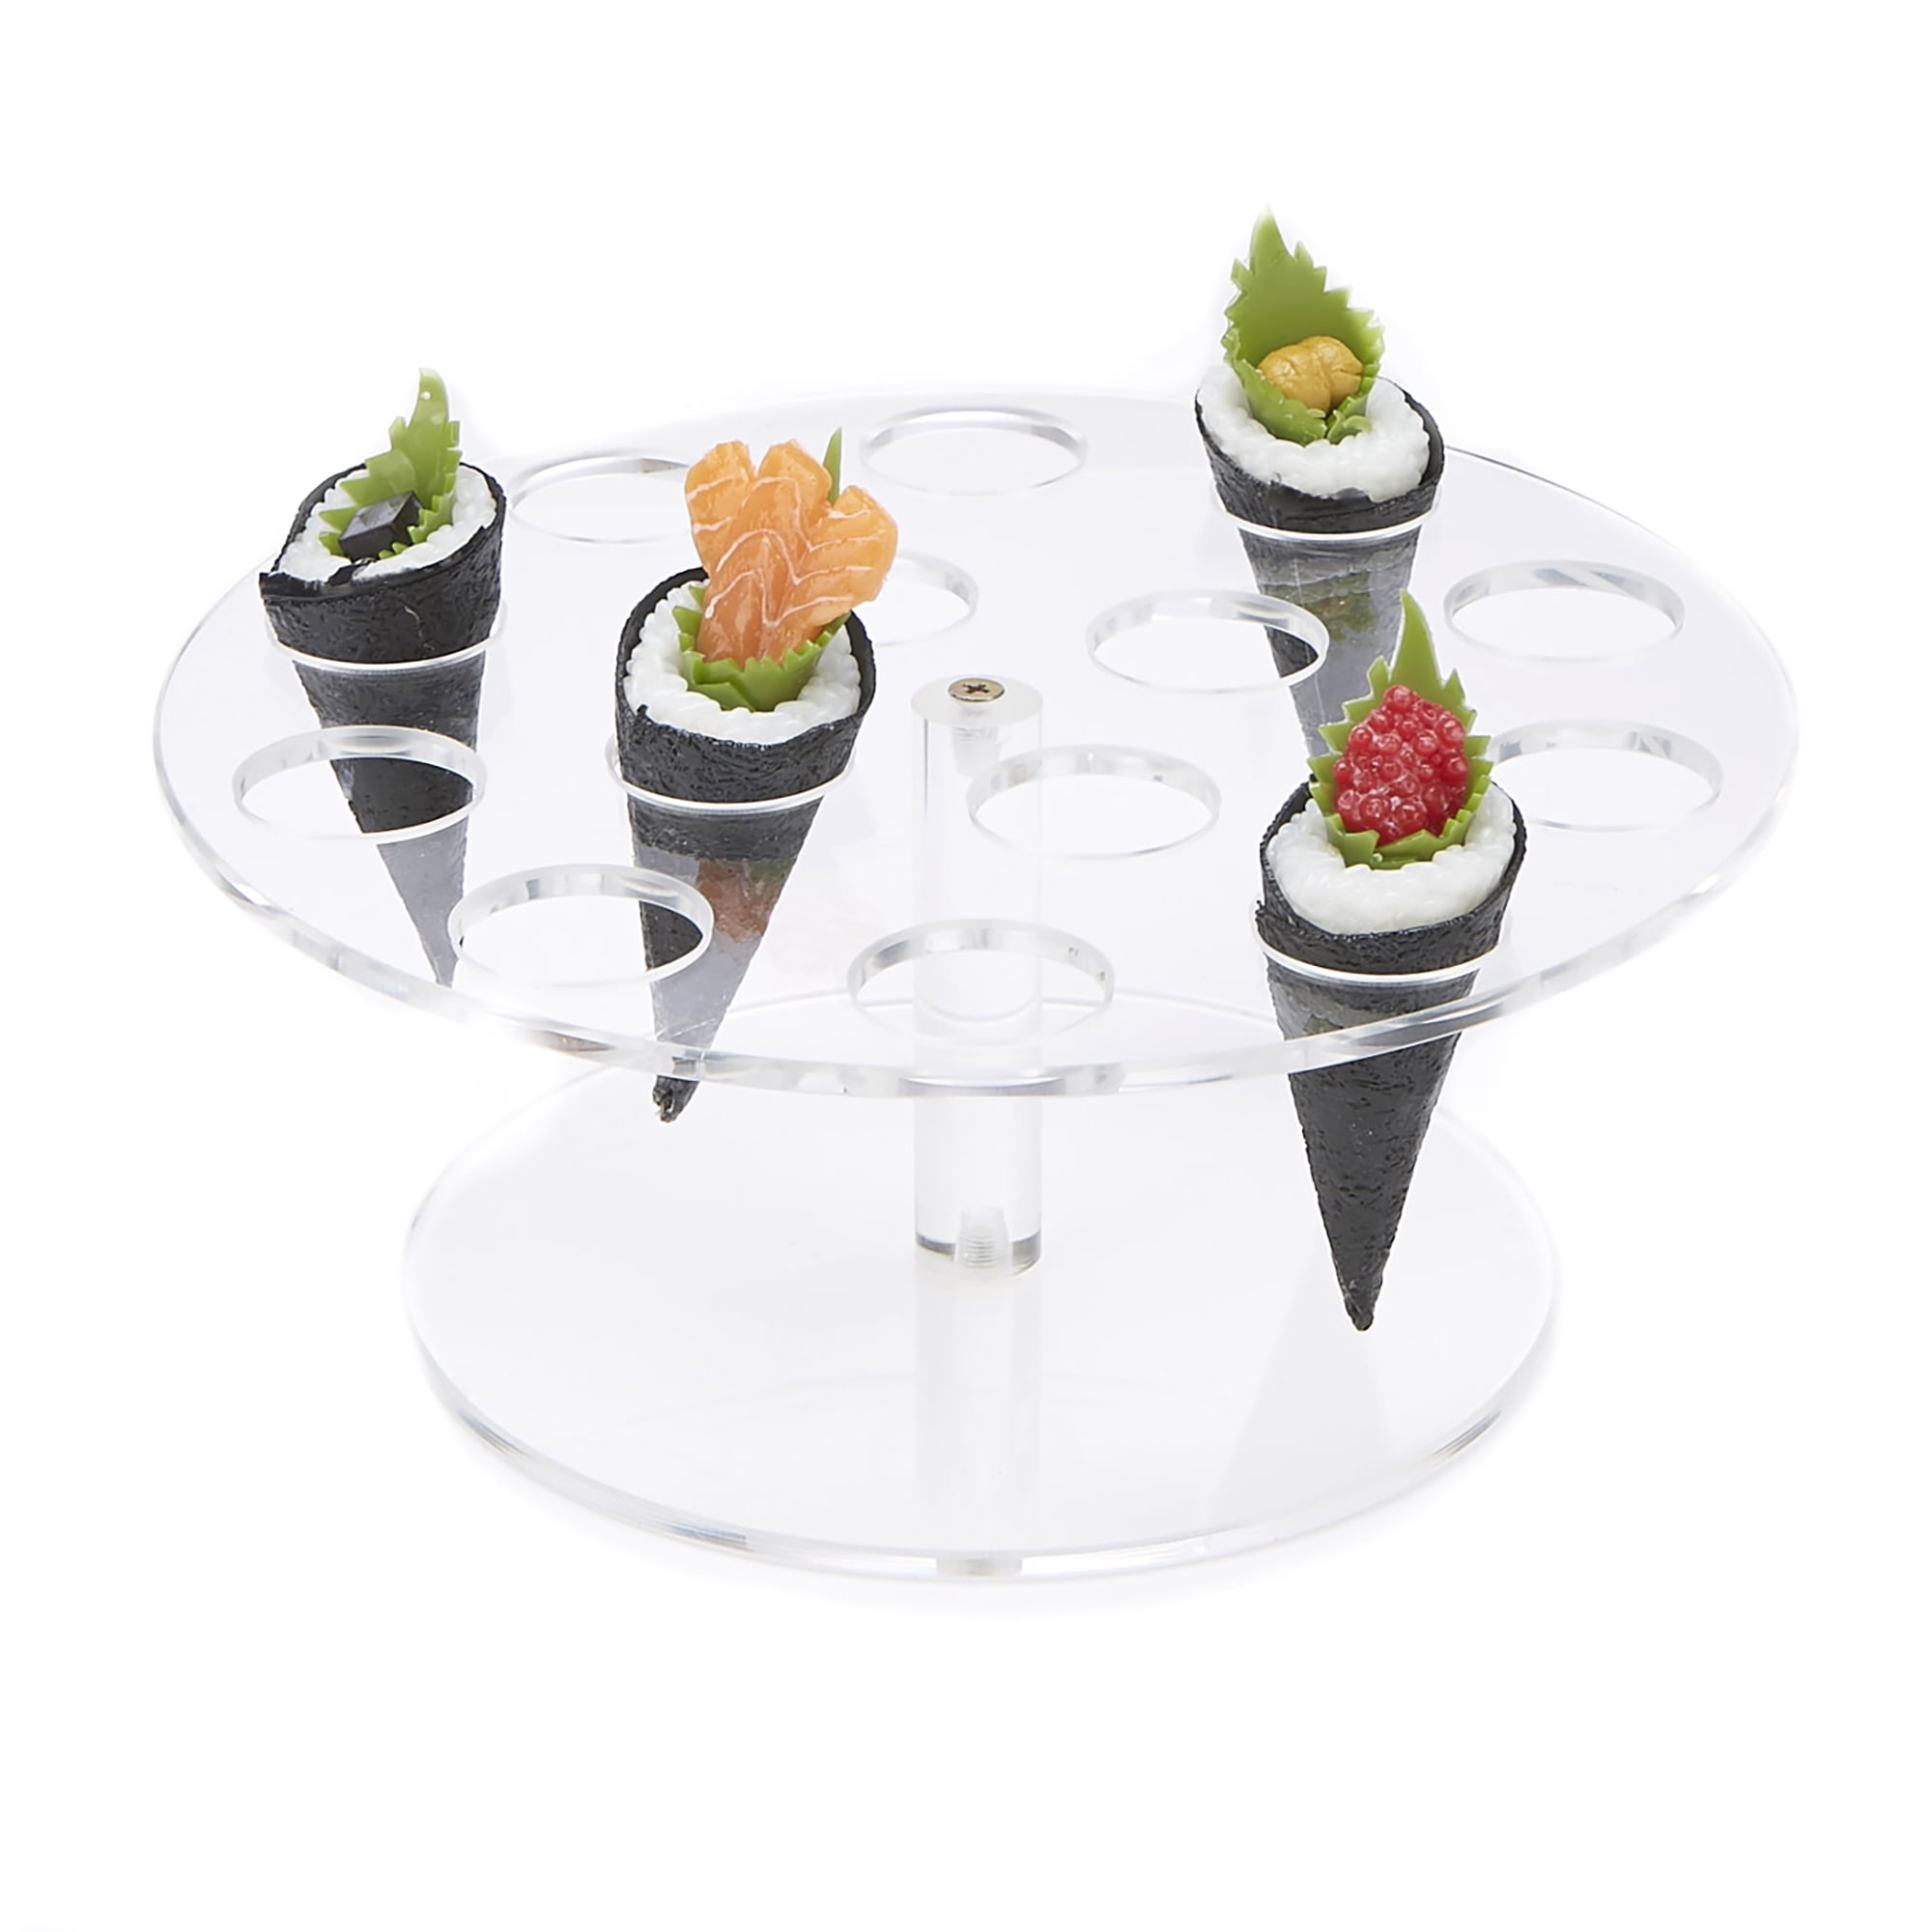 Chip Cone Holder Details about   Acrylic Ice Cream Cone Holder Counter Top Display Stand 